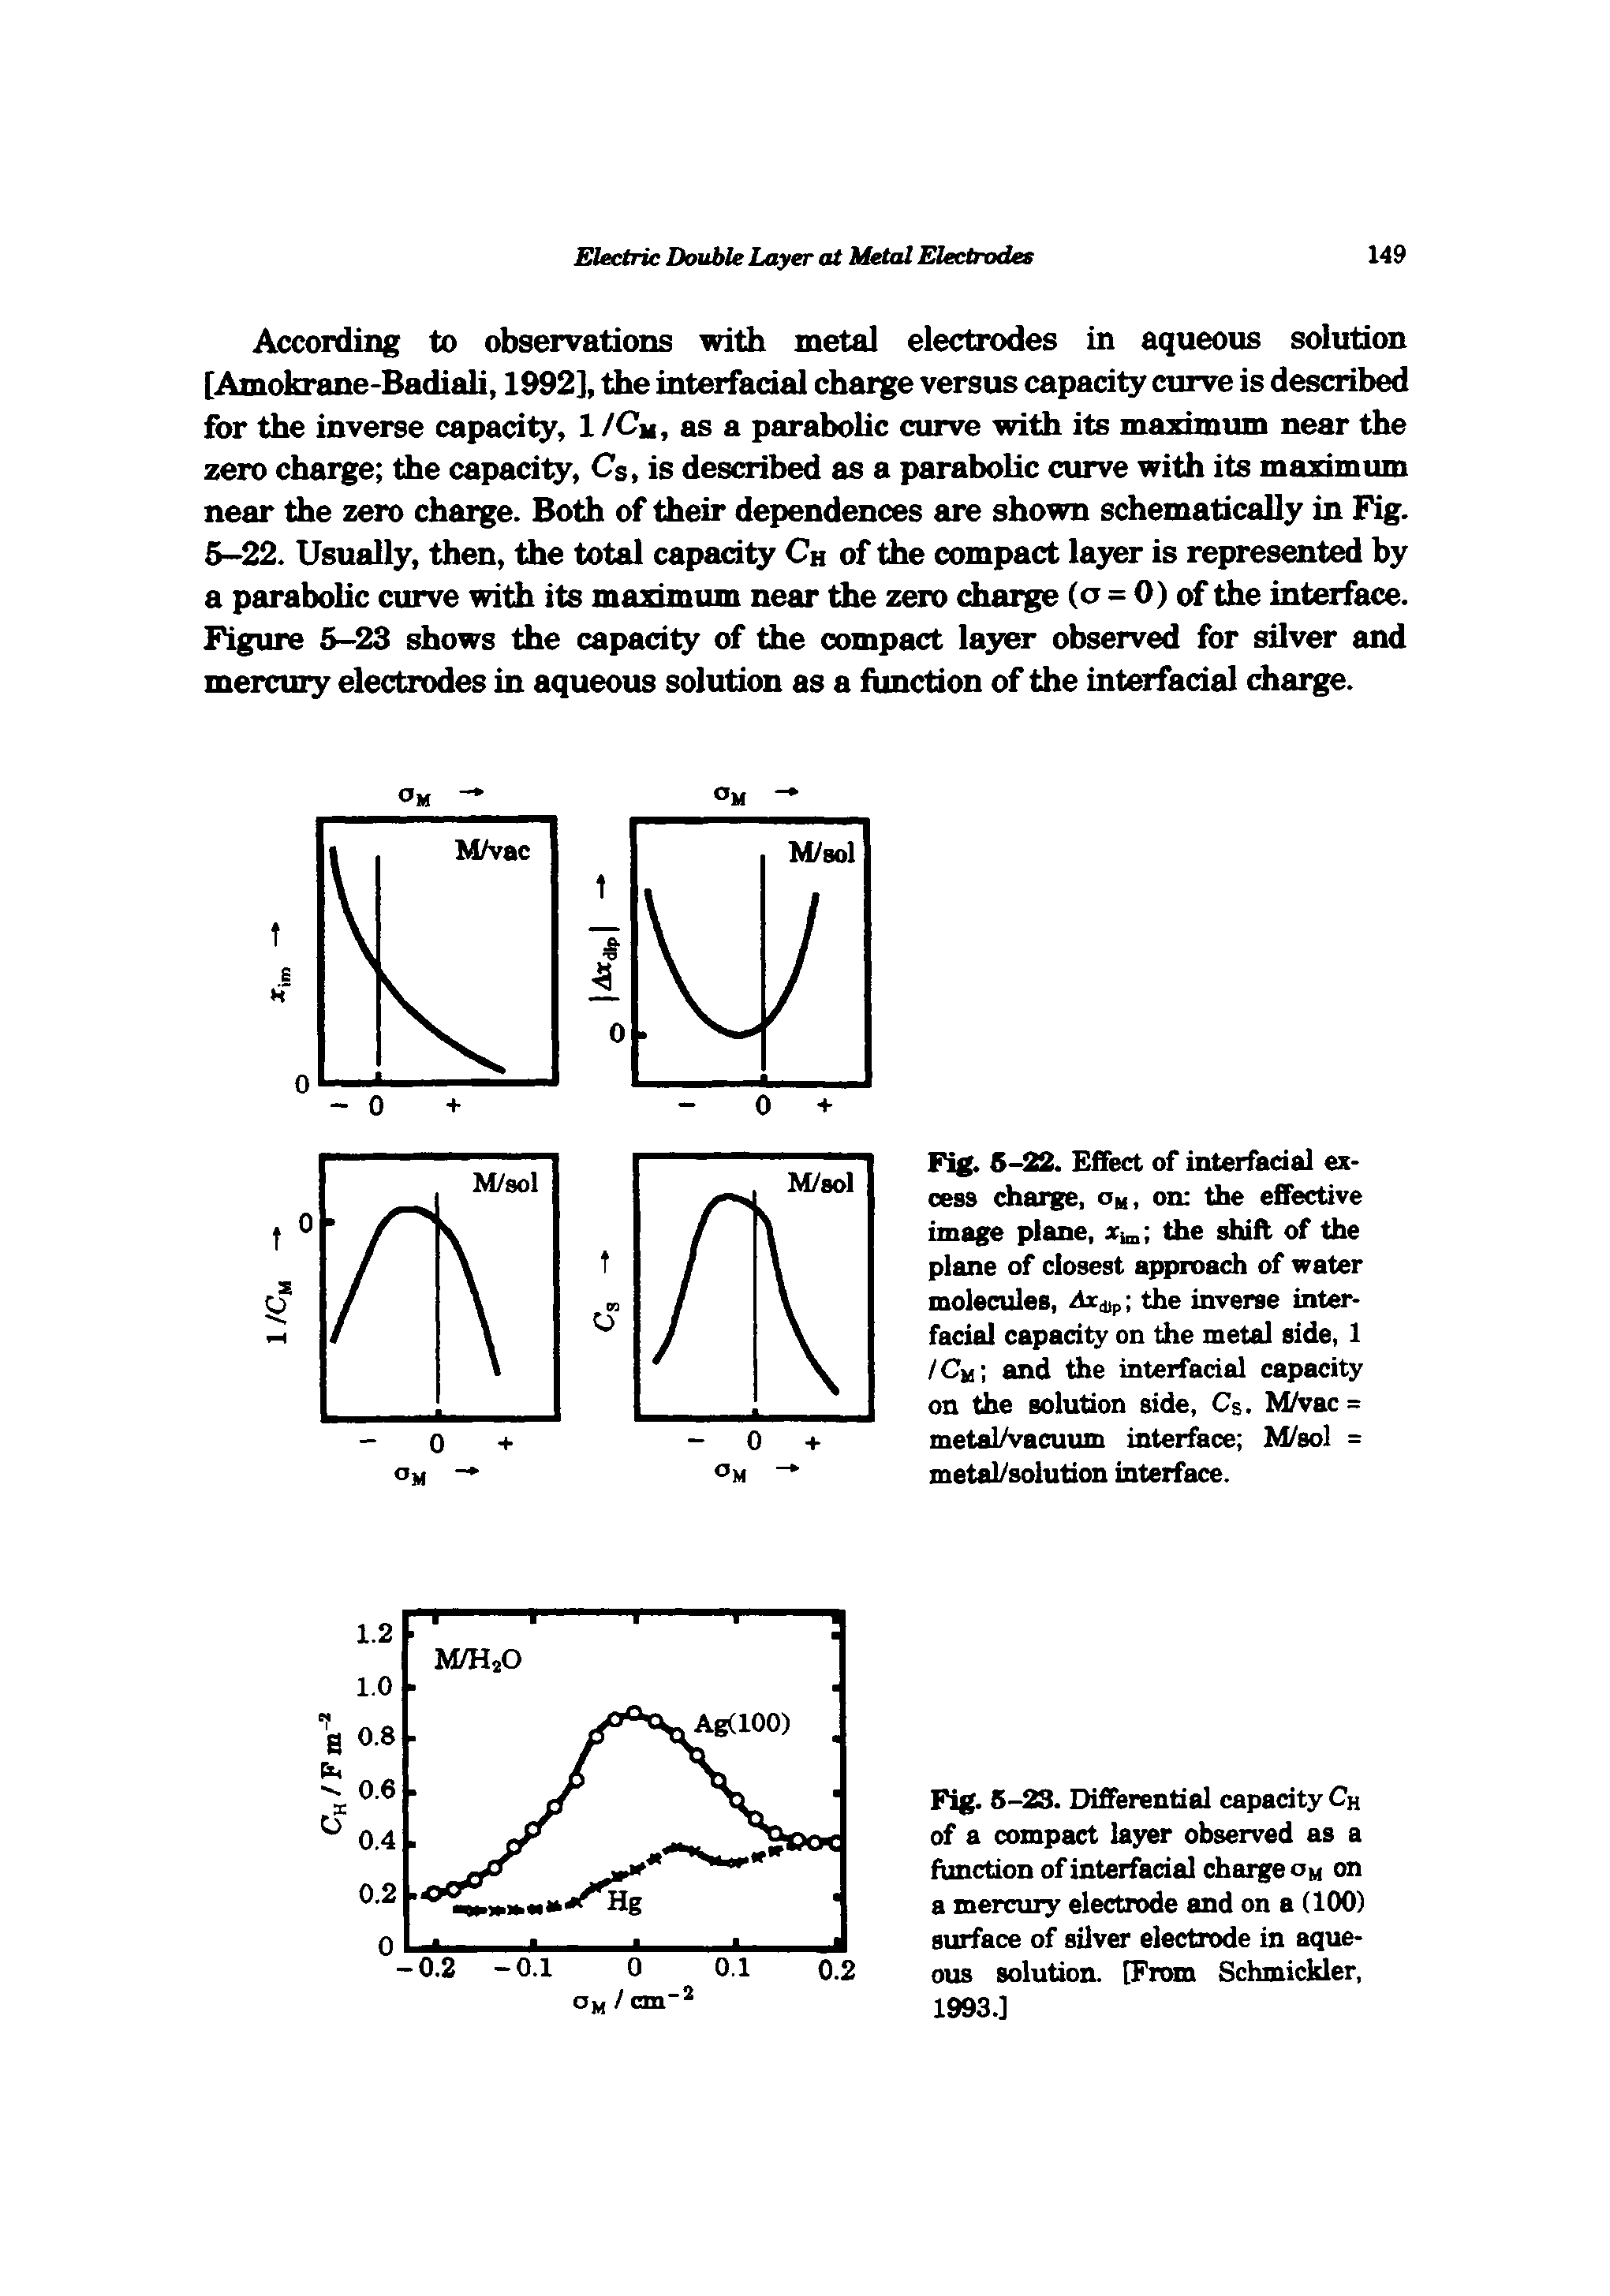 Fig. 6-22. Effect of interfadal excess charge, om, on the effective image plane, Xi , the shift of the plane of closest approach of water molecules, the inverse interfacial capadty on the metal side, 1 /Cm and the interfadal capacity on the solution side, Cs. M/vac = metaWacuum interface M/sol = metal/solution interface.